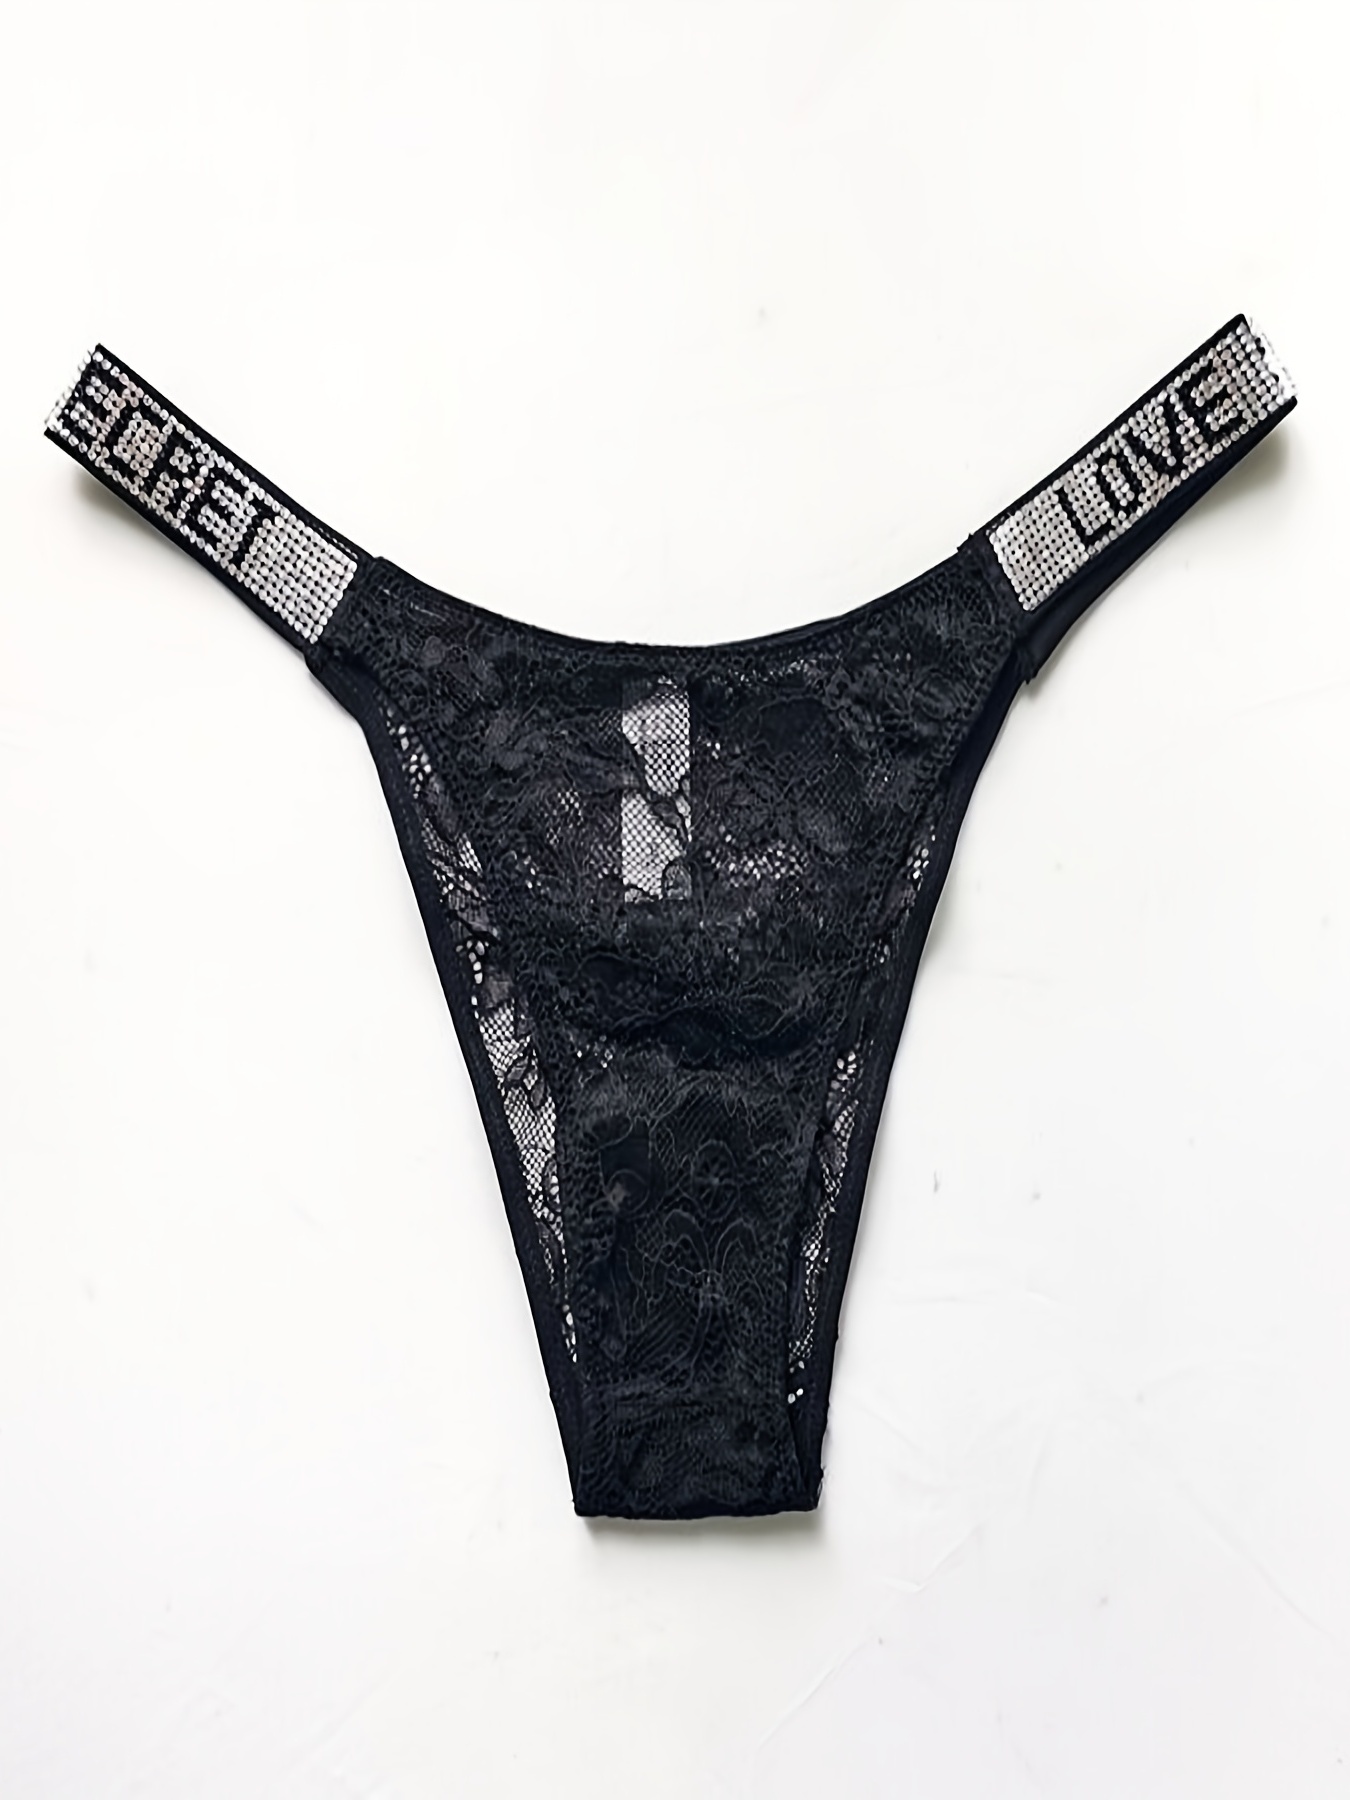 Buy Xs and Os Women's Lace Thong Panty (Small, Black) at